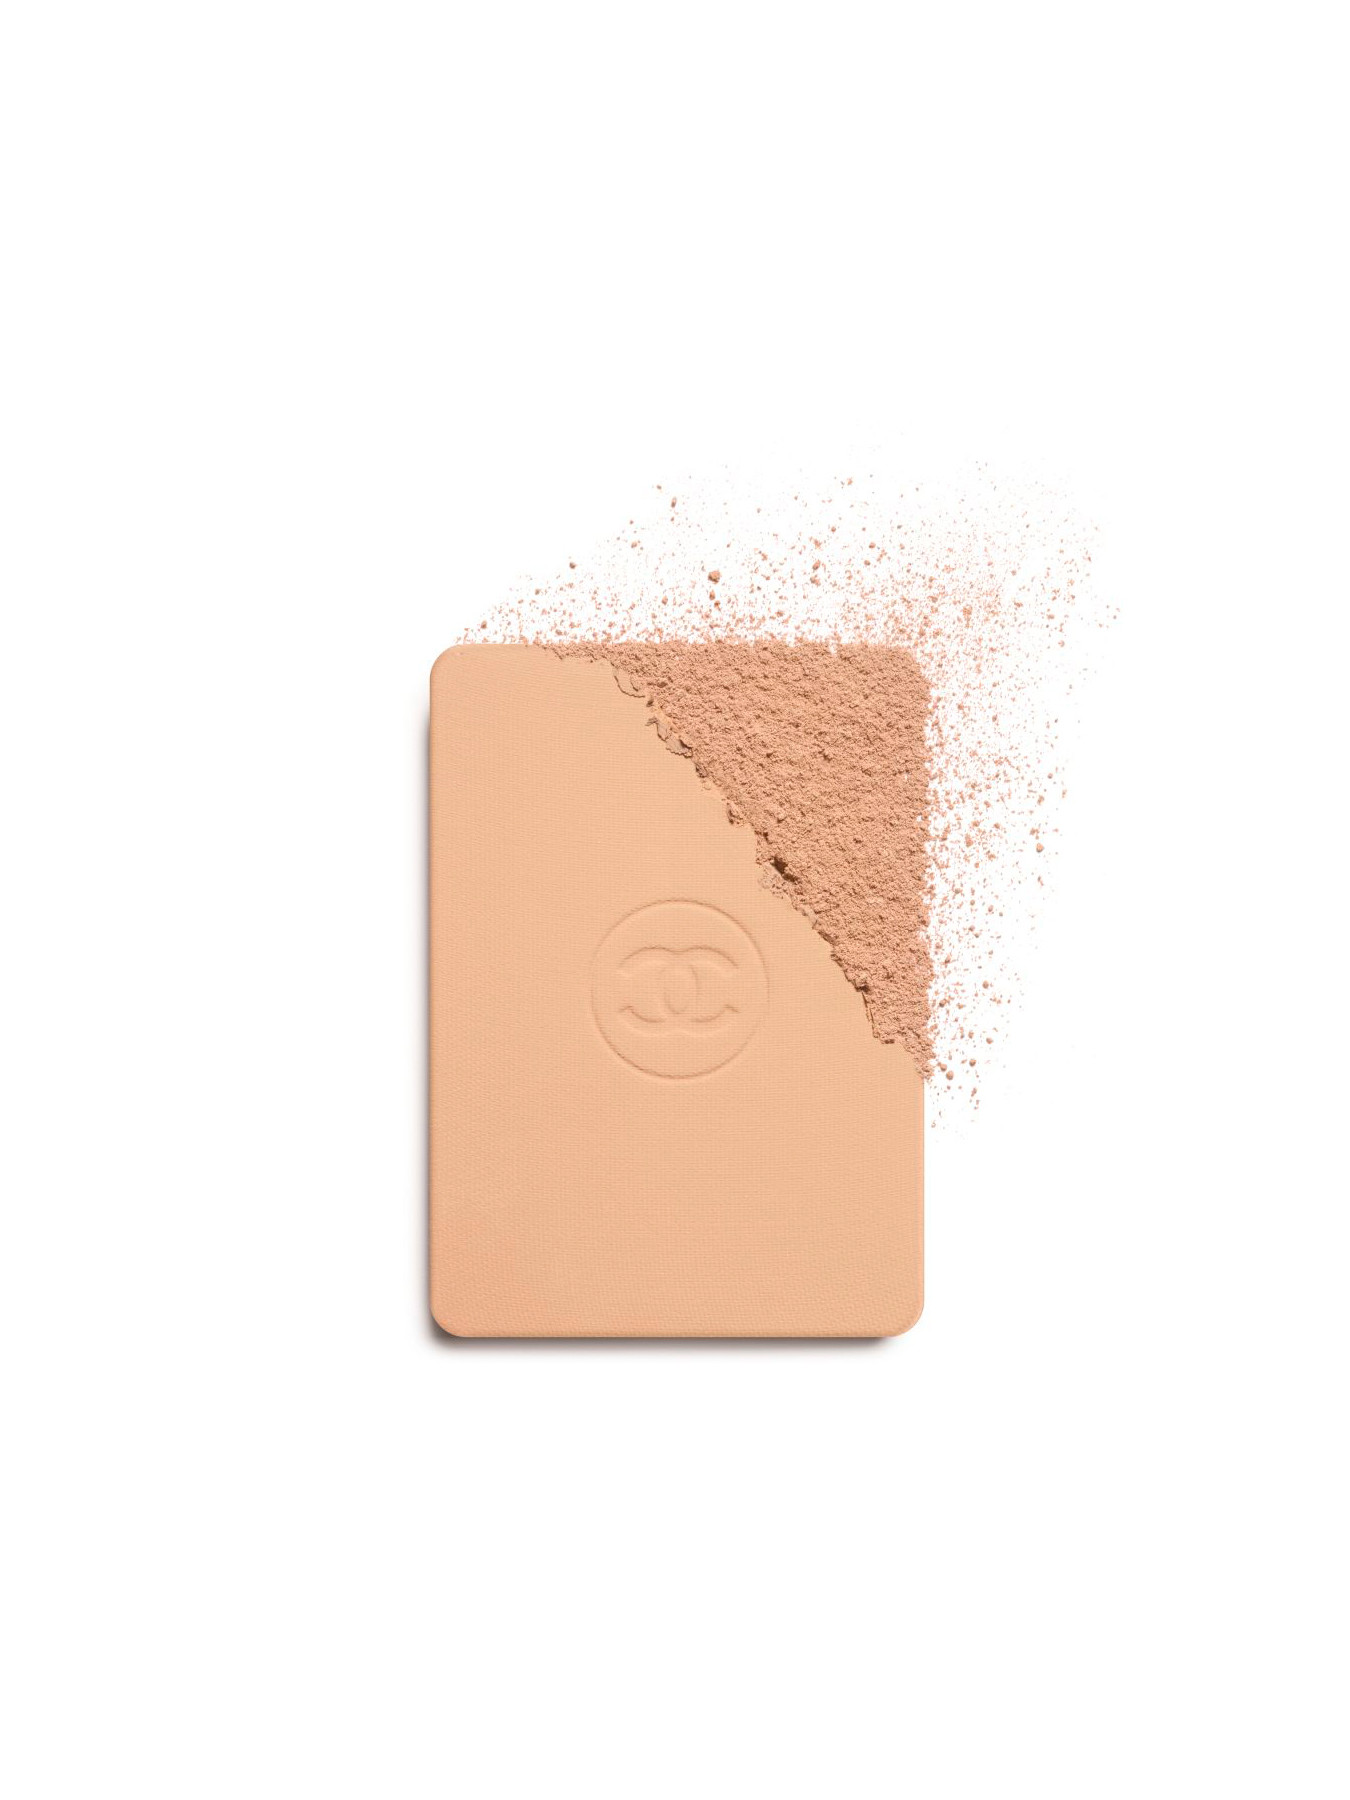 CHANEL ULTRA LE TEINT ALL-DAY FLAWLESS FINISH